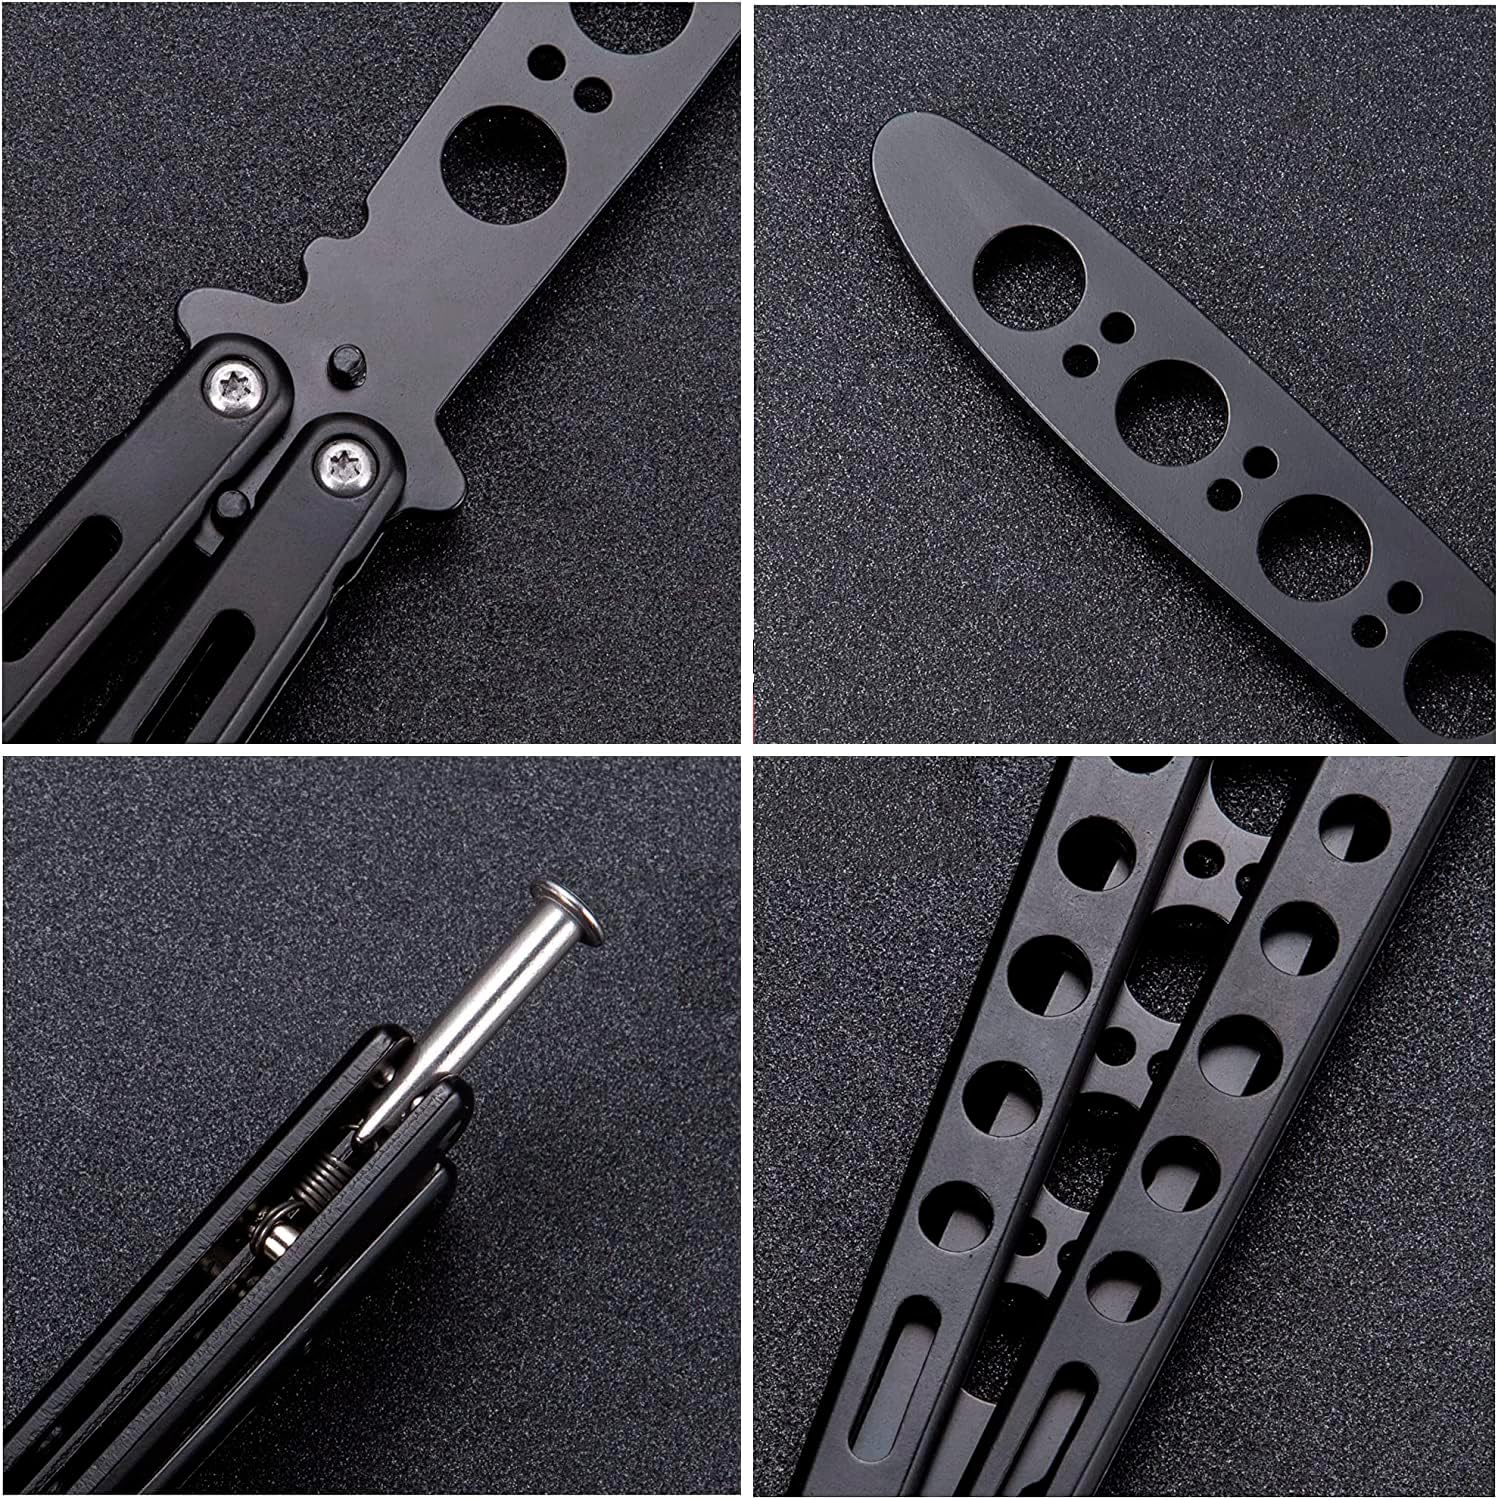 Trainer Butterfly knives